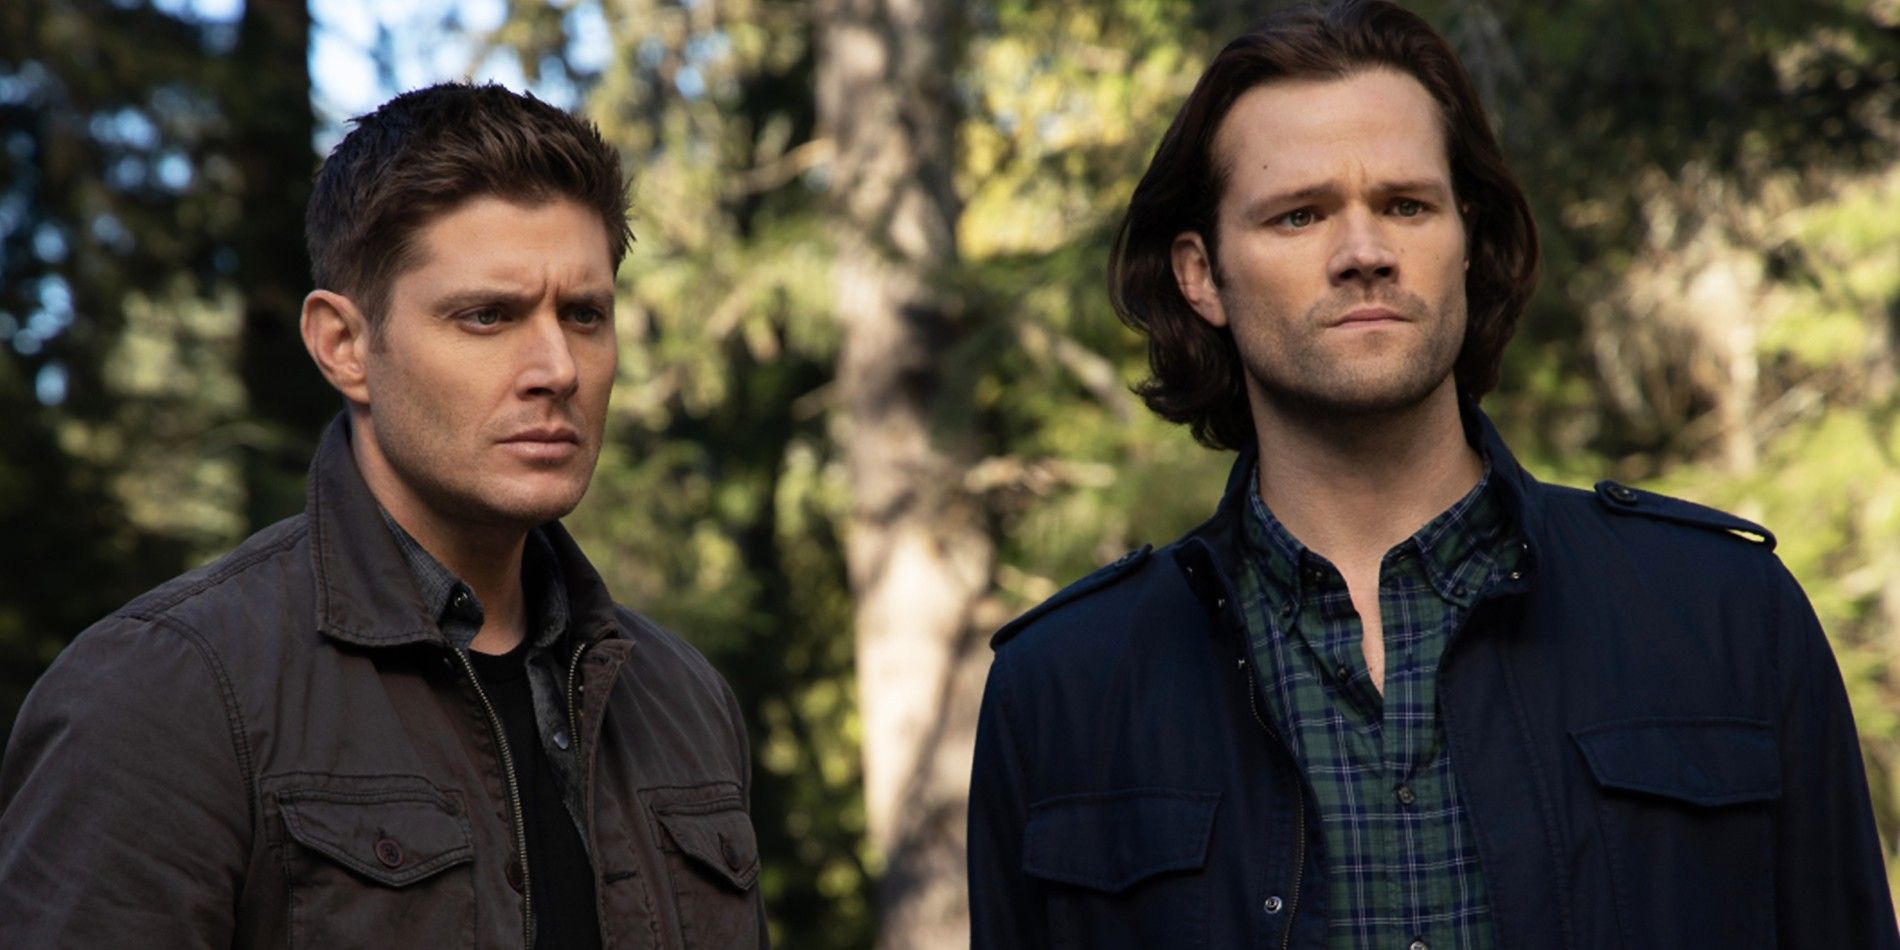 Supernatural Season 15s Finale Is About Sam & Dean Not The Mythology